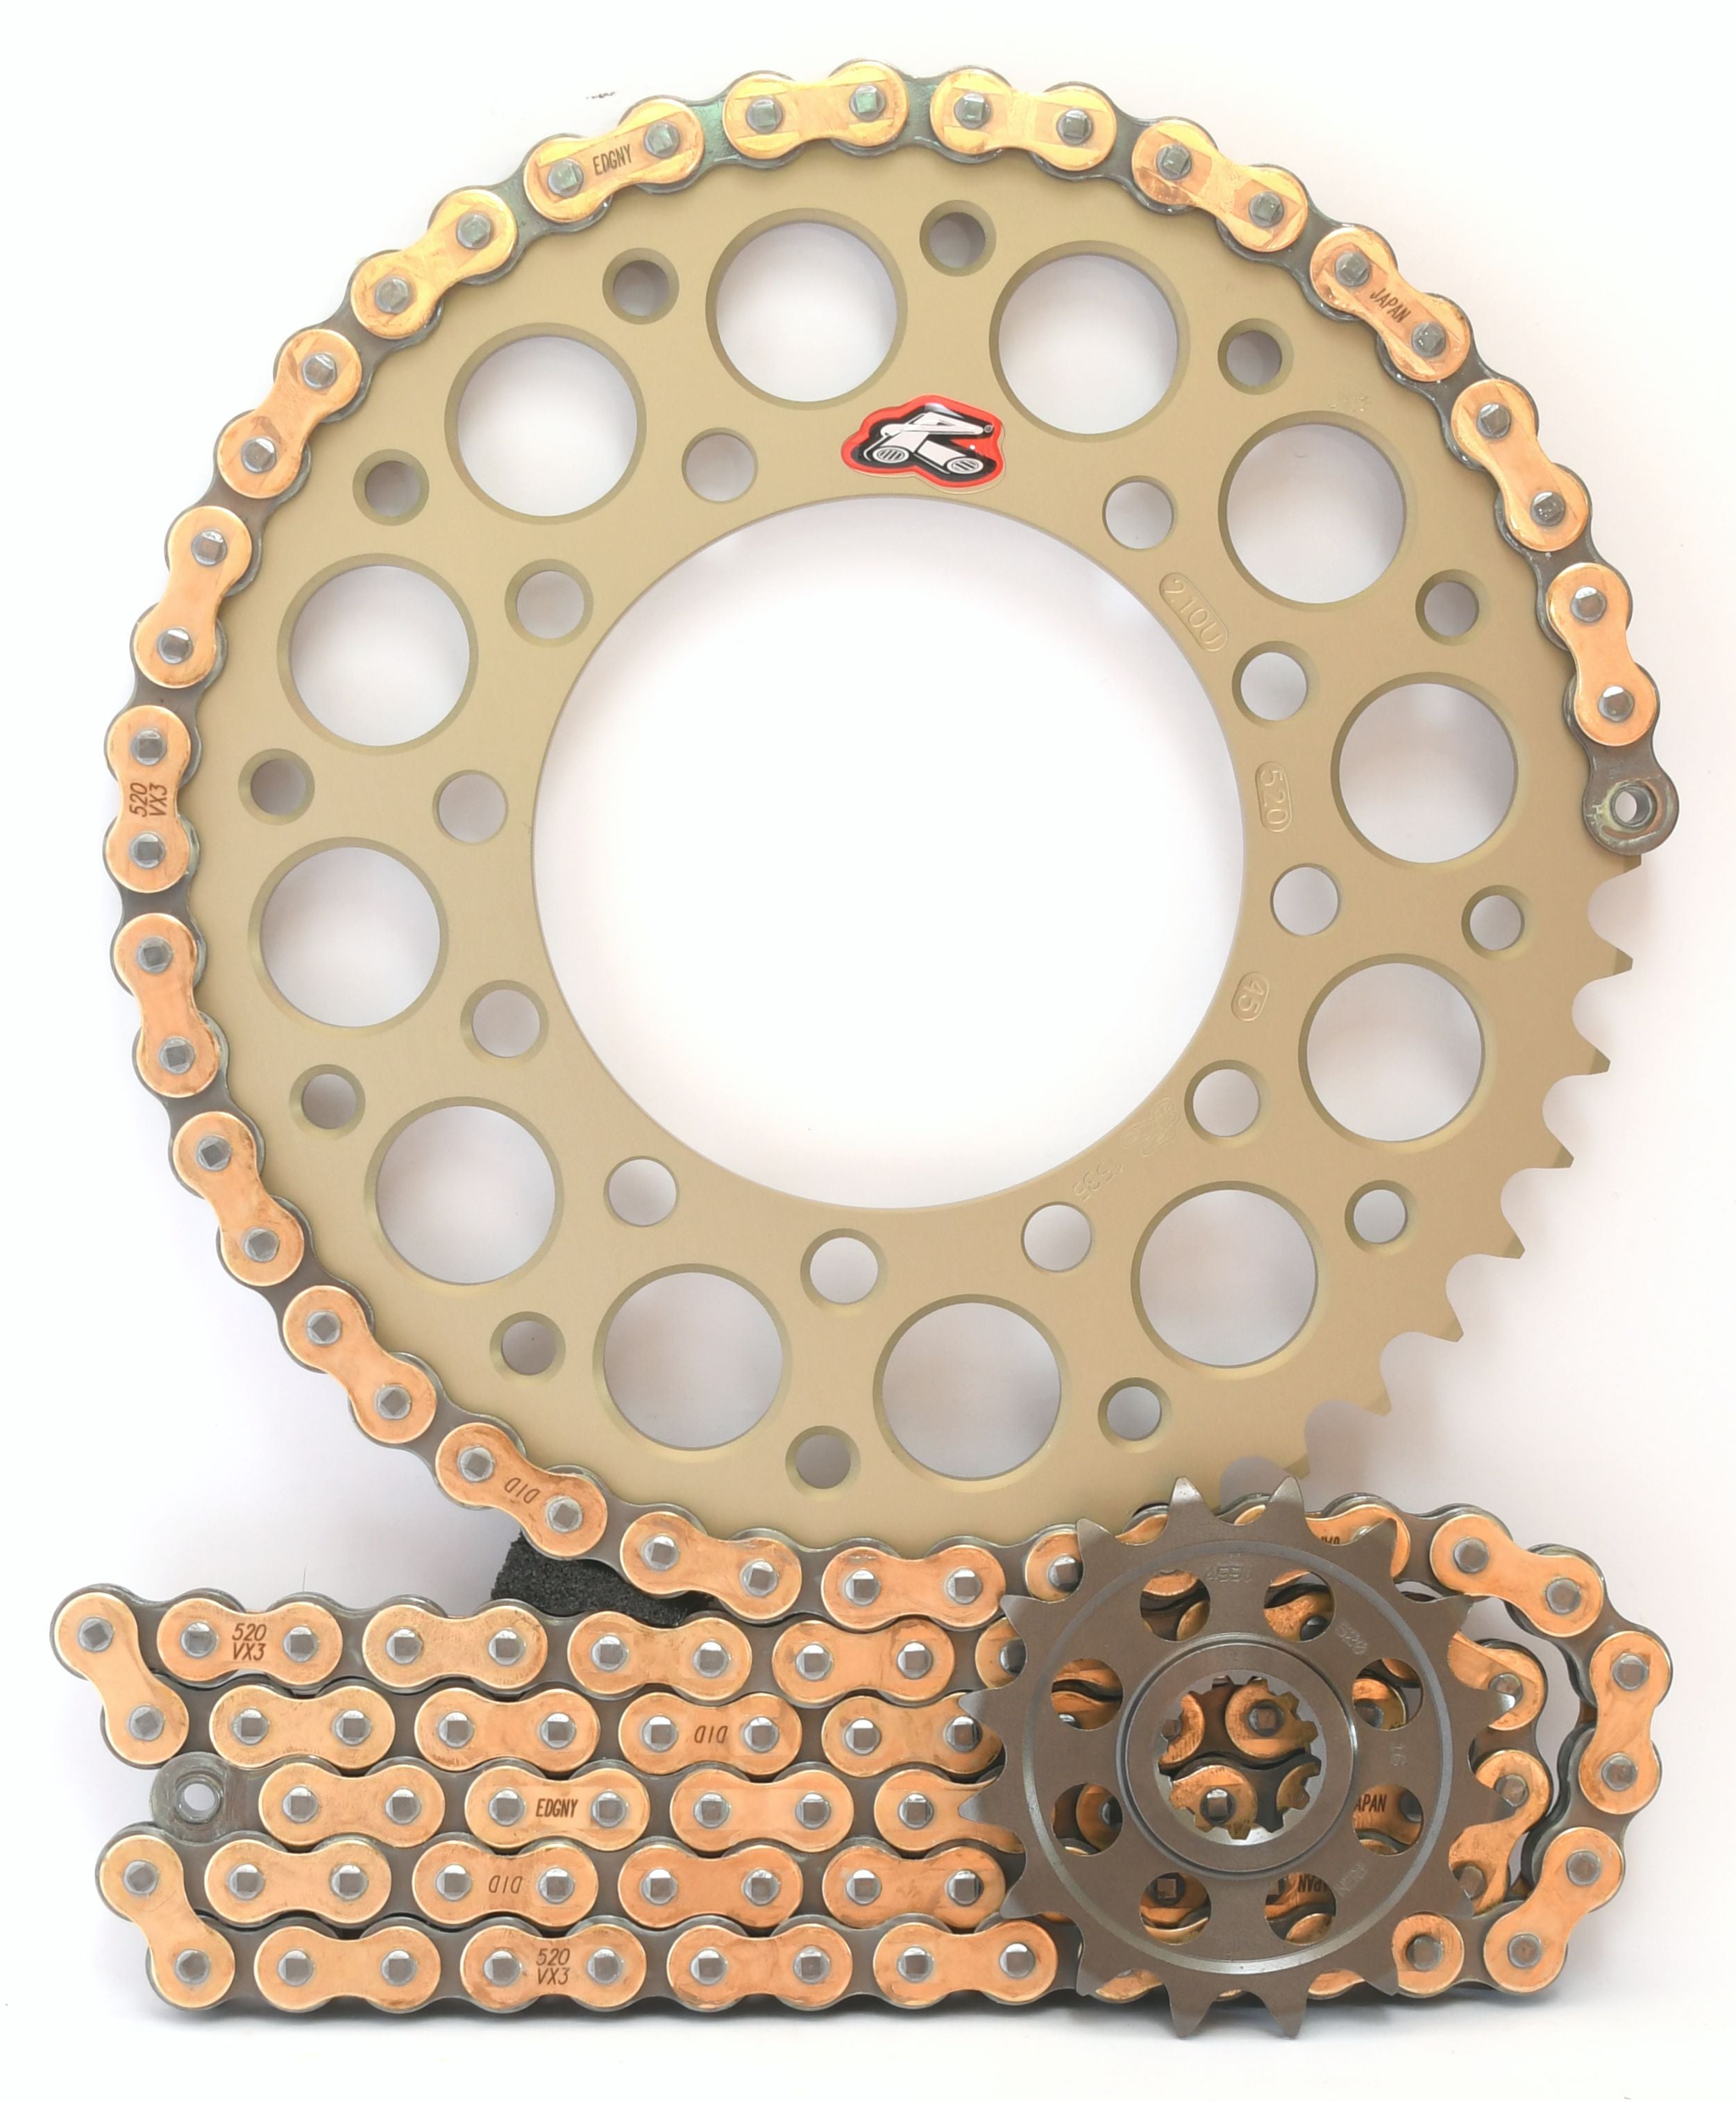 Renthal Ultralight and DID Chain & Sprocket Kit for Yamaha R6 2006> - 520 Conversion - Standard Gearing